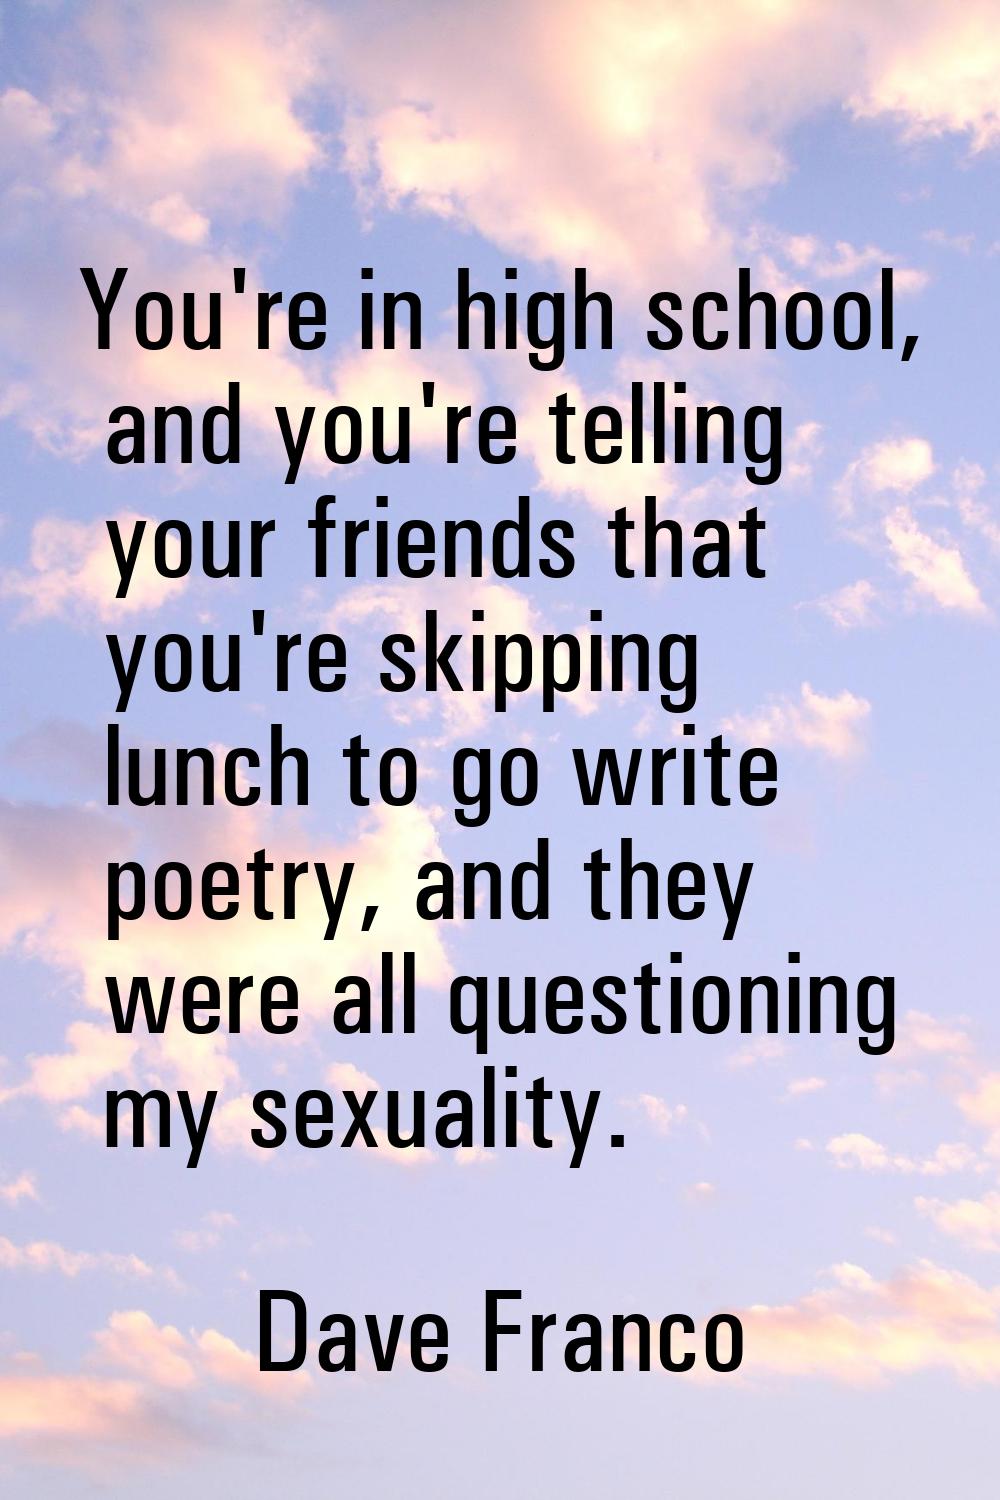 You're in high school, and you're telling your friends that you're skipping lunch to go write poetr